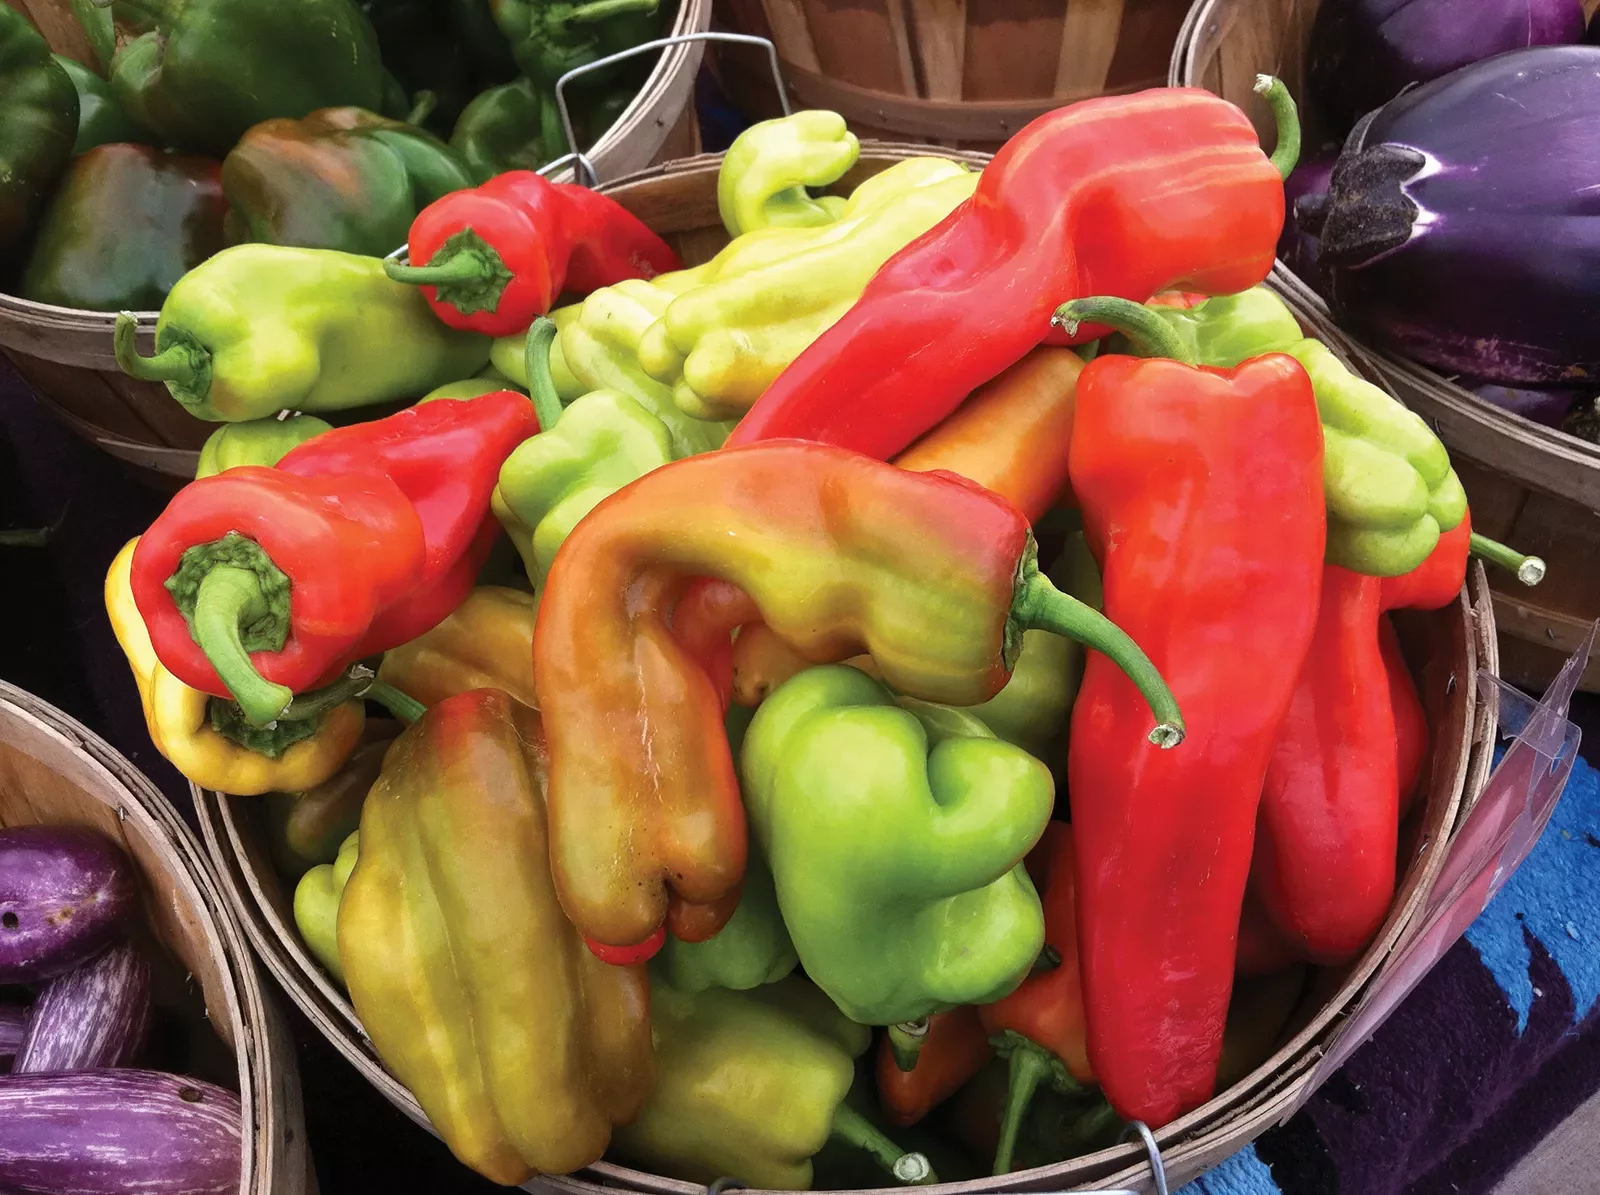 Colorful peppers in basket